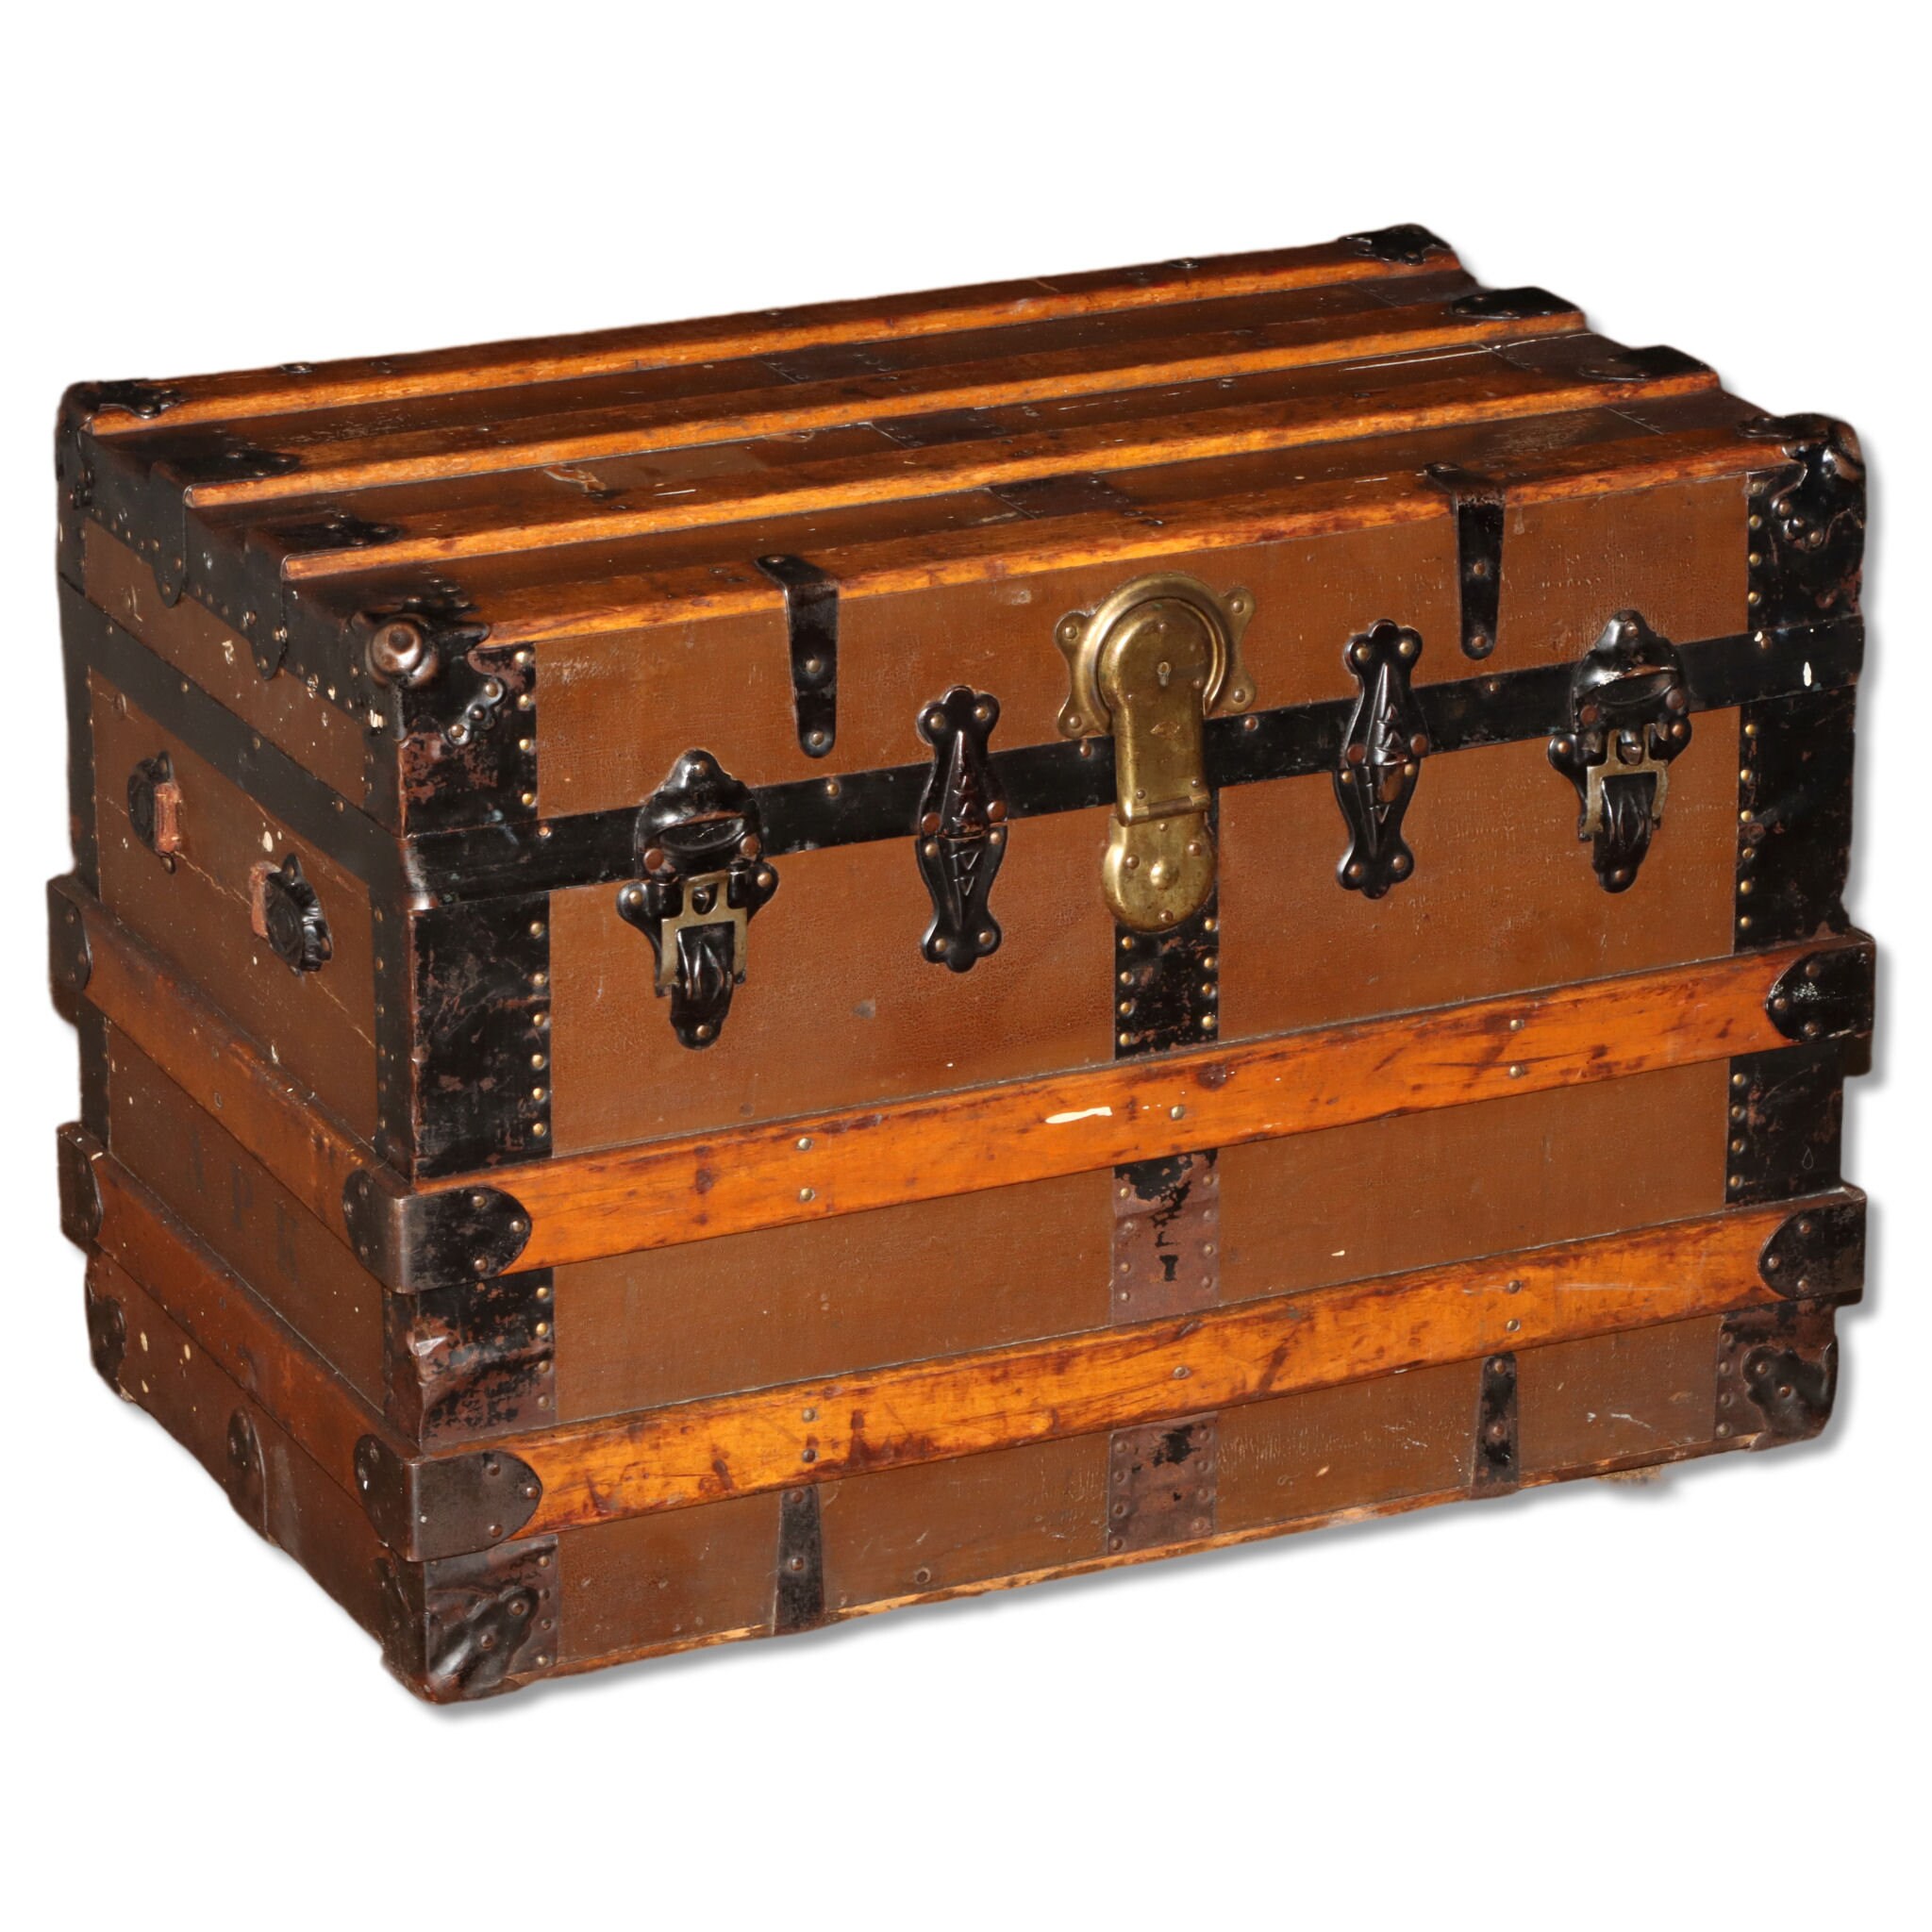 Antique Ornate Large Travel Trunk, Steamer Trunk, Late 19th Century.